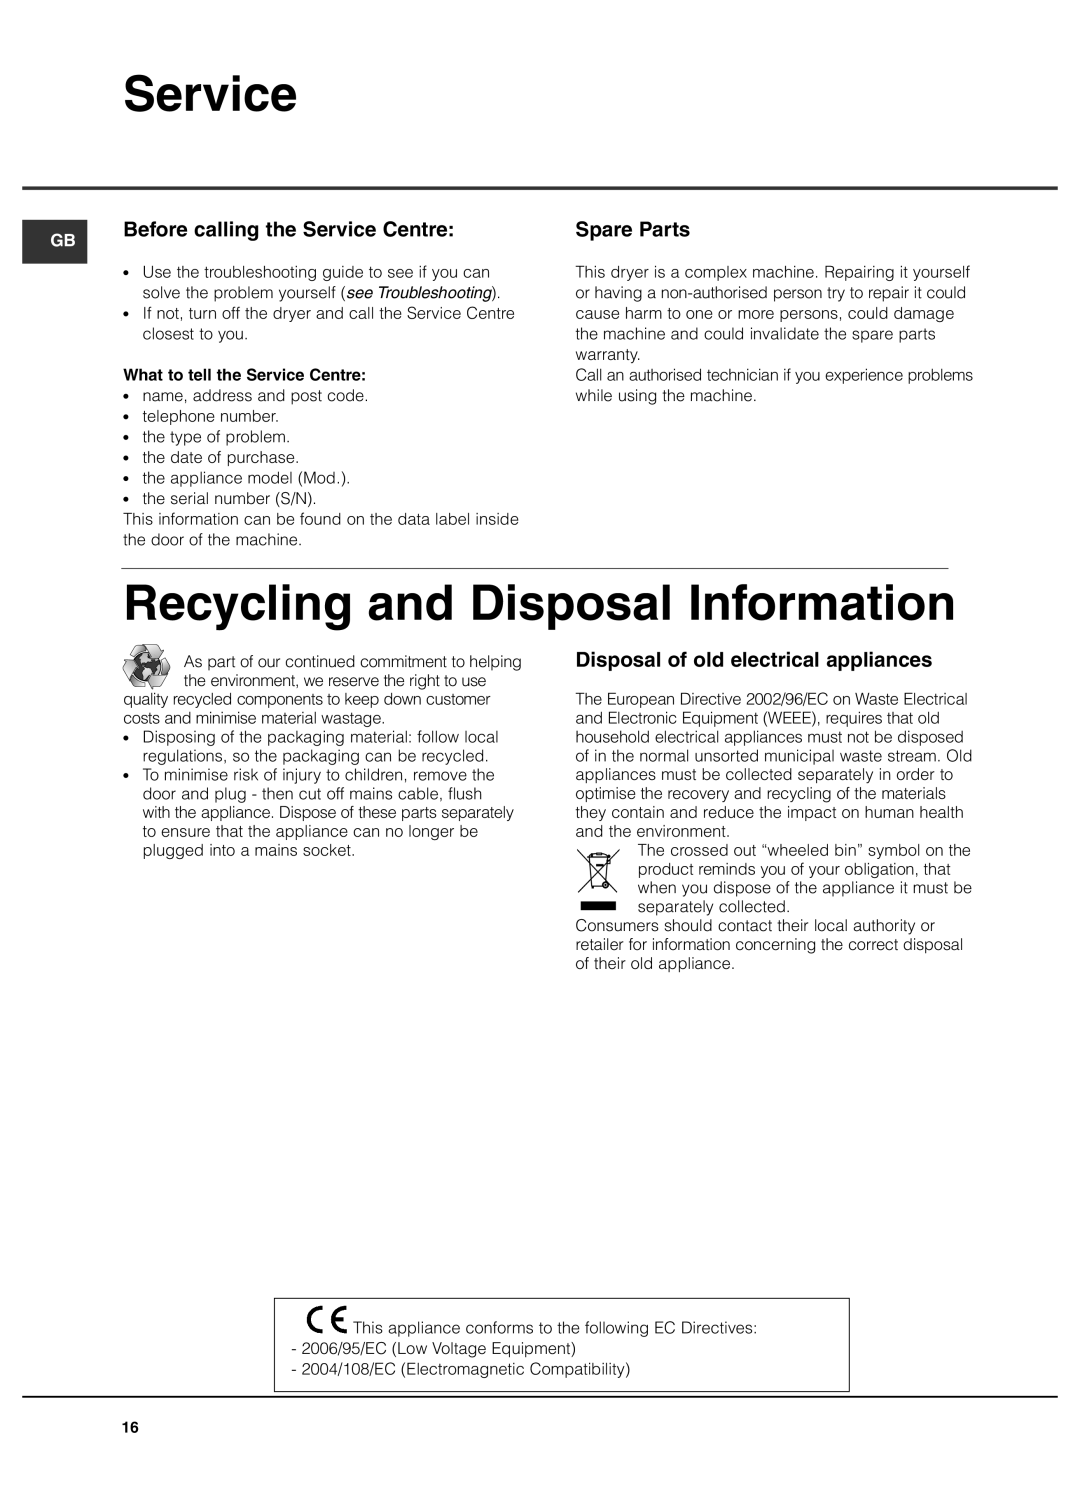 Hotpoint TCEl 87B Experience manual Recycling and Disposal Information, Before calling the Service Centre, Spare Parts 